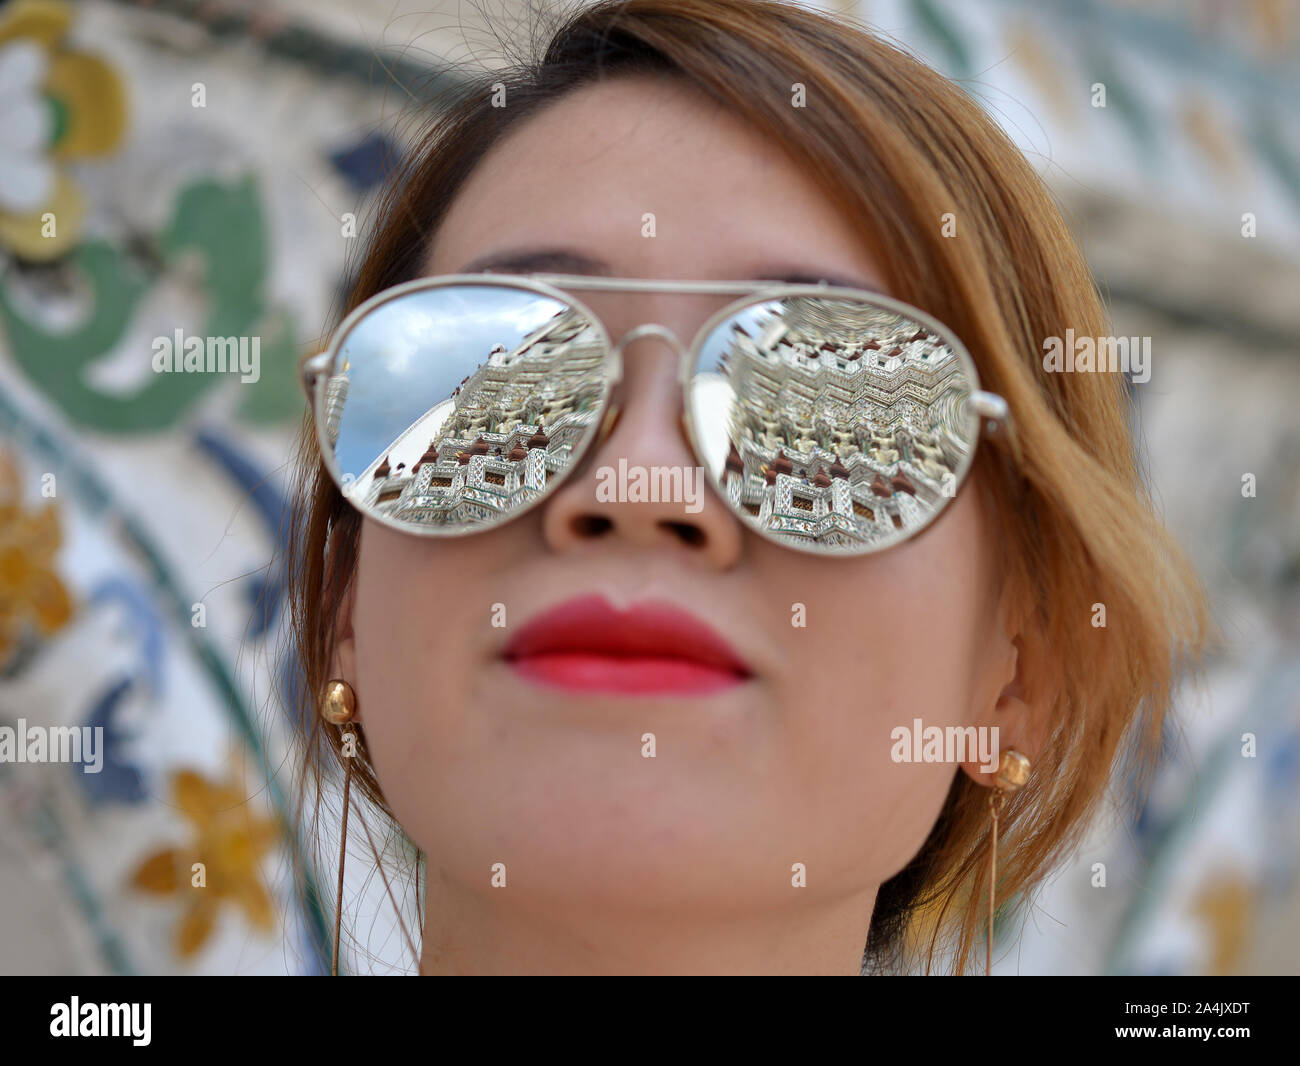 Young Chinese woman (tourist) with mirrored sunglasses looks at the faience facade of Bangkok’s famous Wat Arun temple. Stock Photo